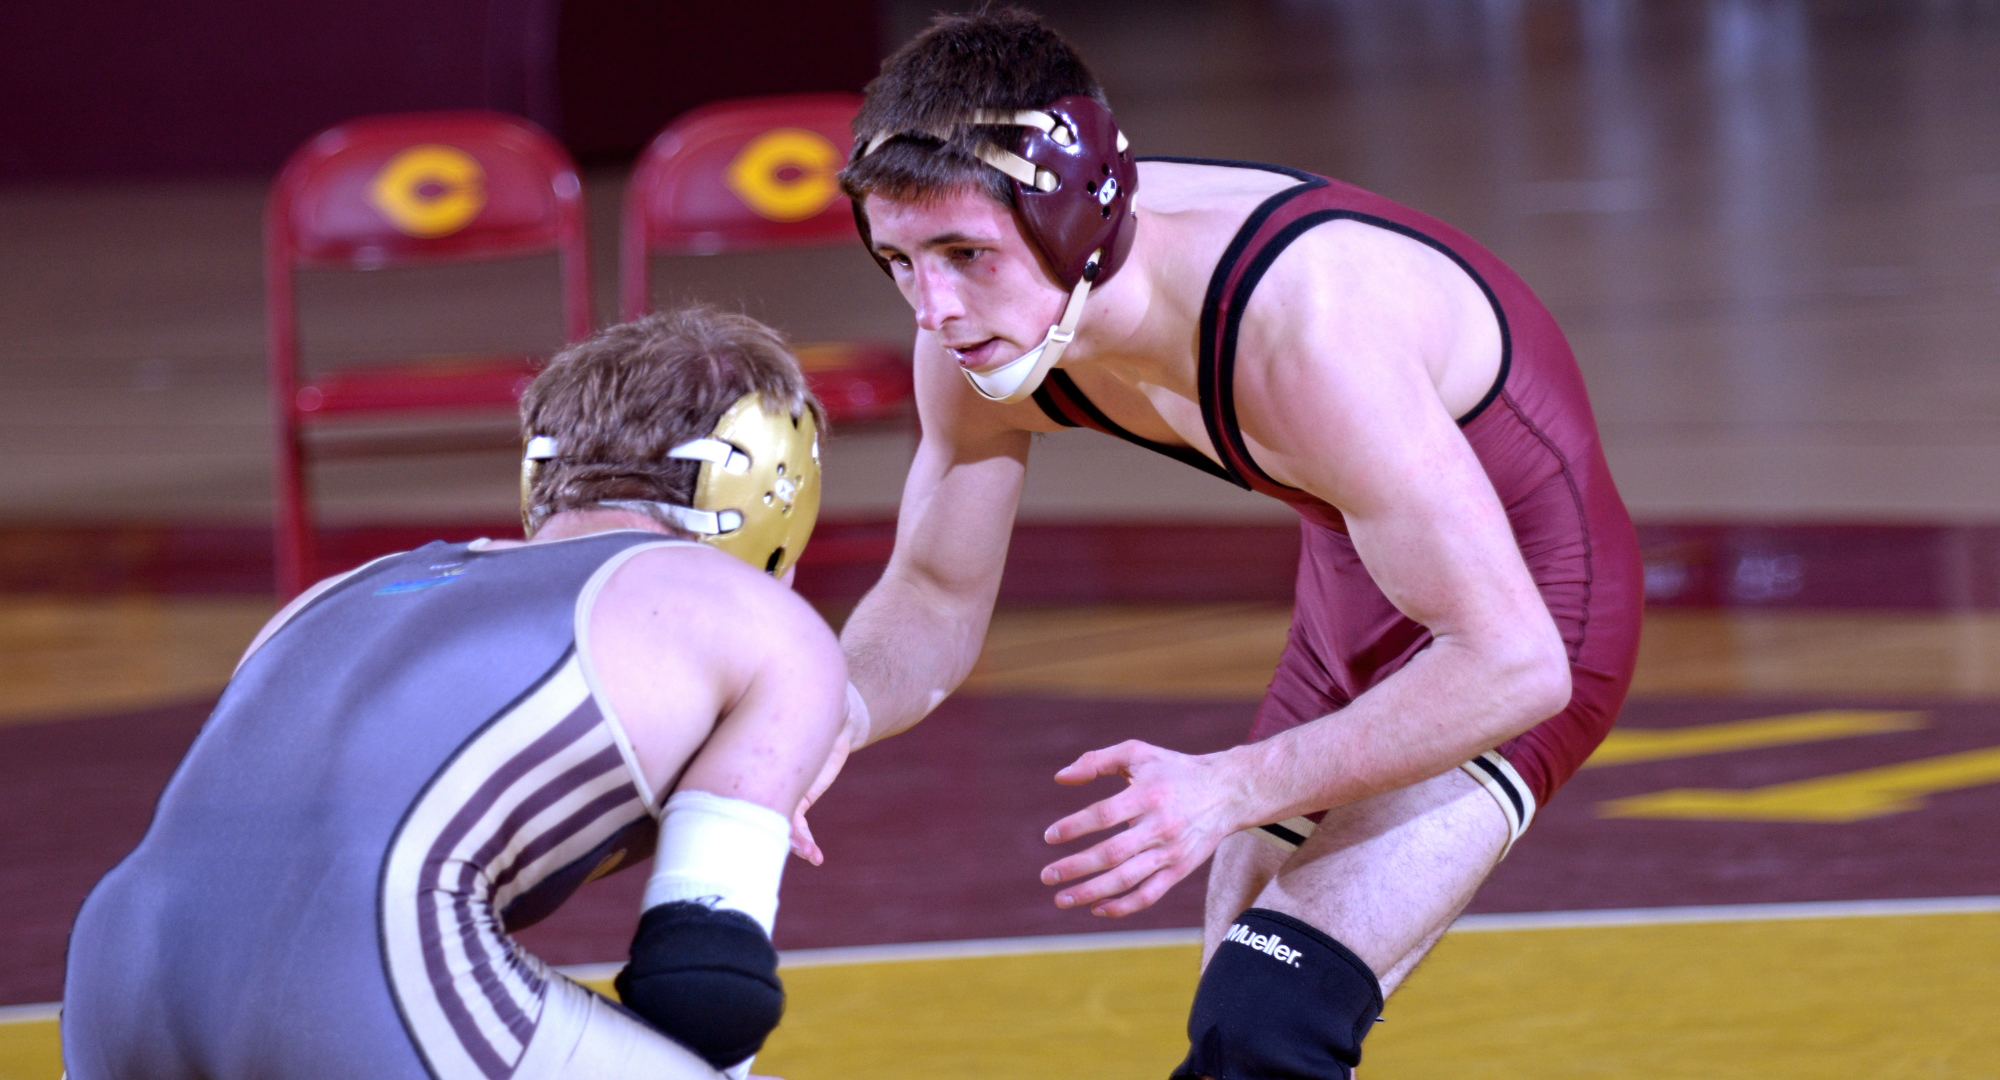 Senior Aaron Dick was the spark plug for the Cobbers' 22-18 win at MSU Moorhead as he recorded a pin fall at the 1:33 mark of the very first match of the night.